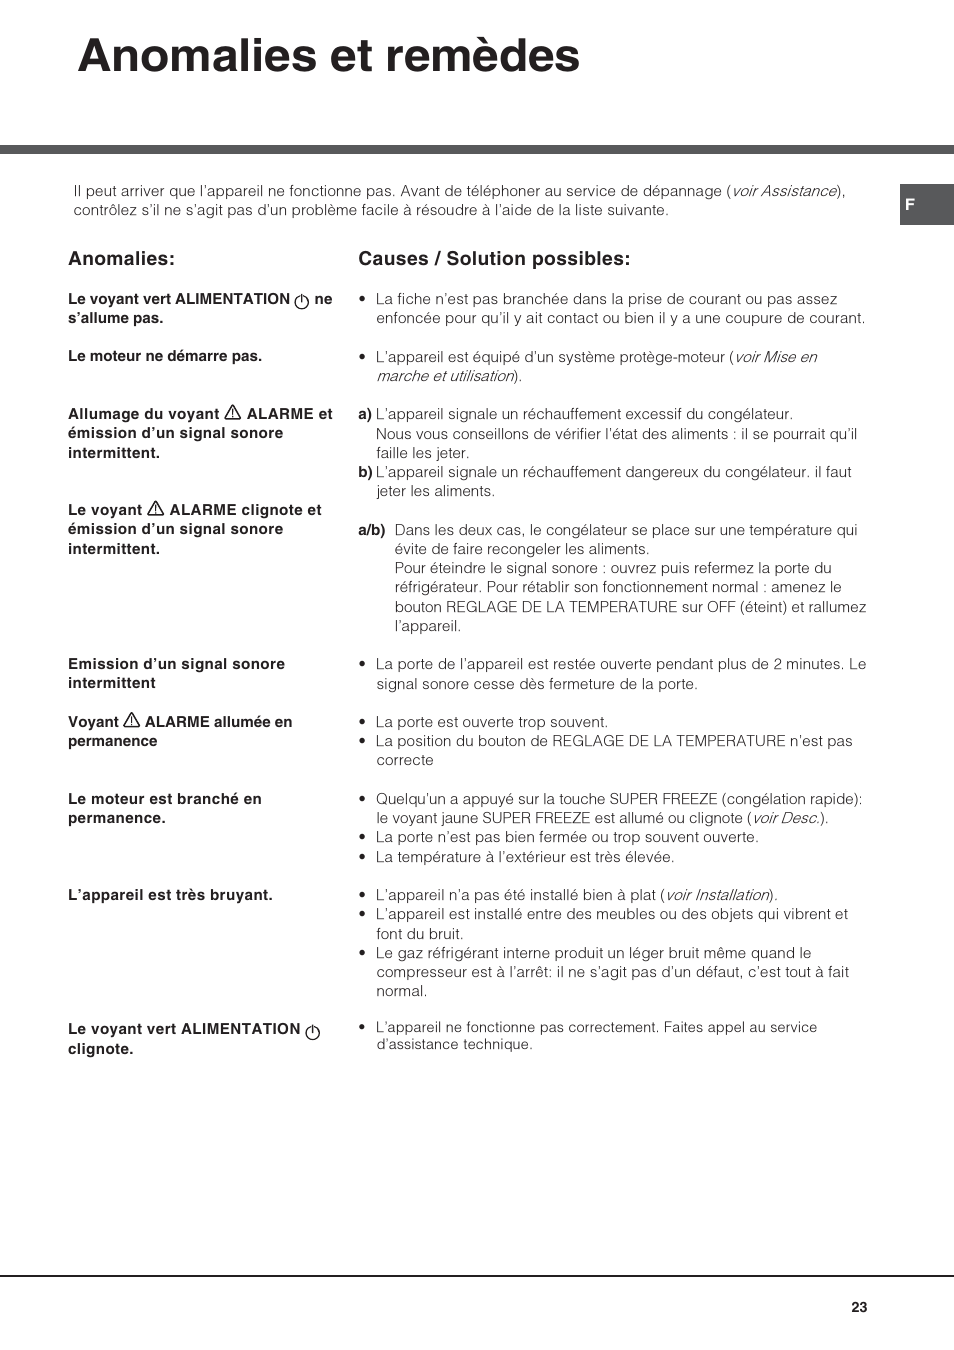 Anomalies et remèdes | Hotpoint Ariston UPS 1721 F-HA User Manual | Page 23  / 48